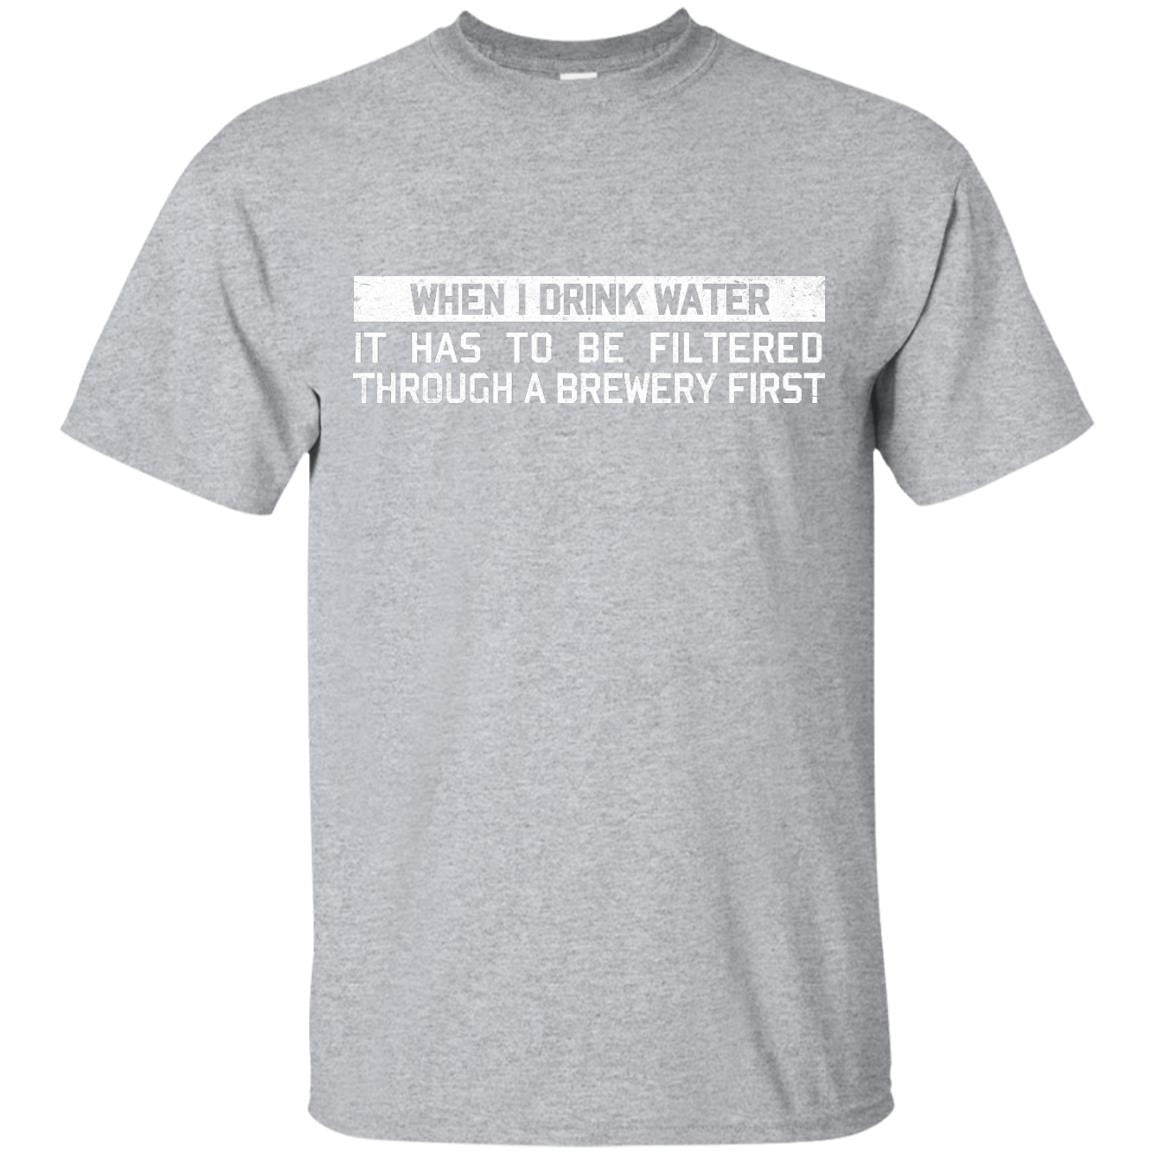 When I Drink Water It Has To Be Filtered Through A Brewery First T-Shirt Apparel - The Beer Lodge